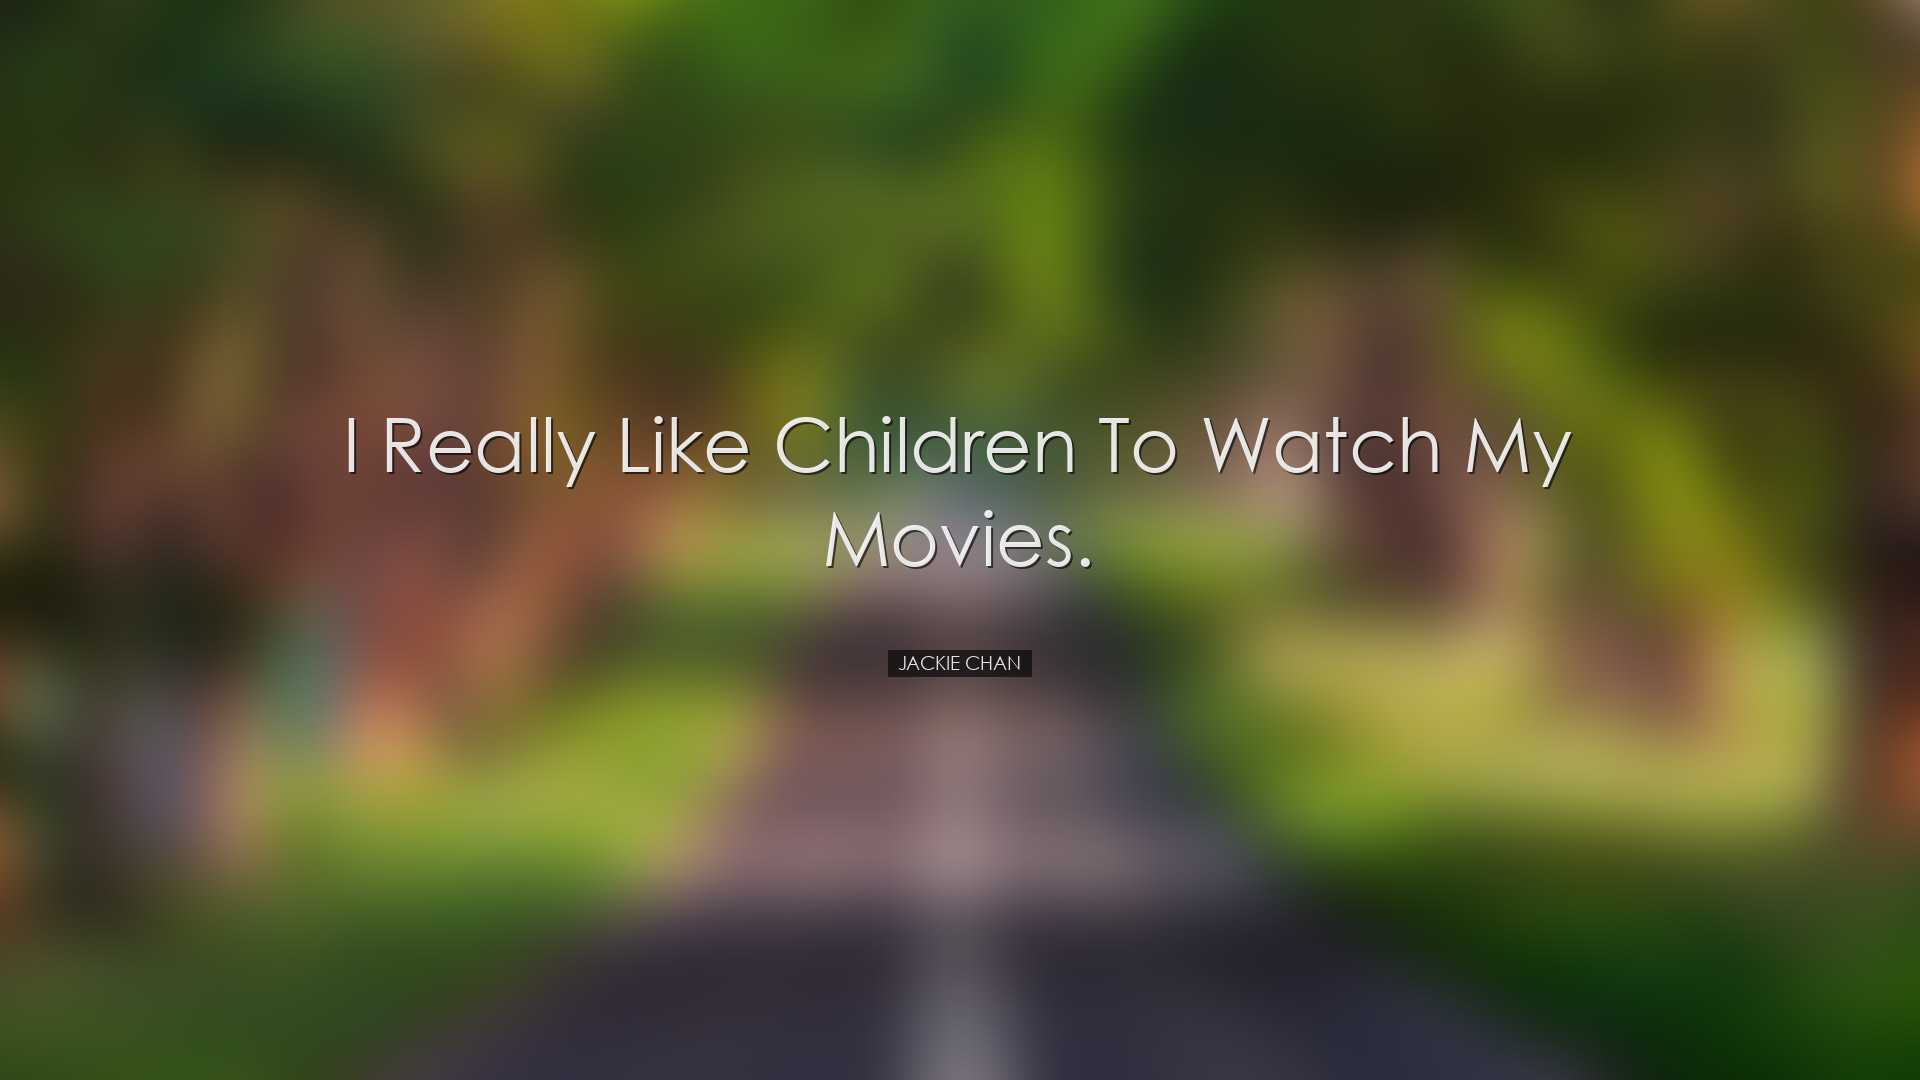 I really like children to watch my movies. - Jackie Chan